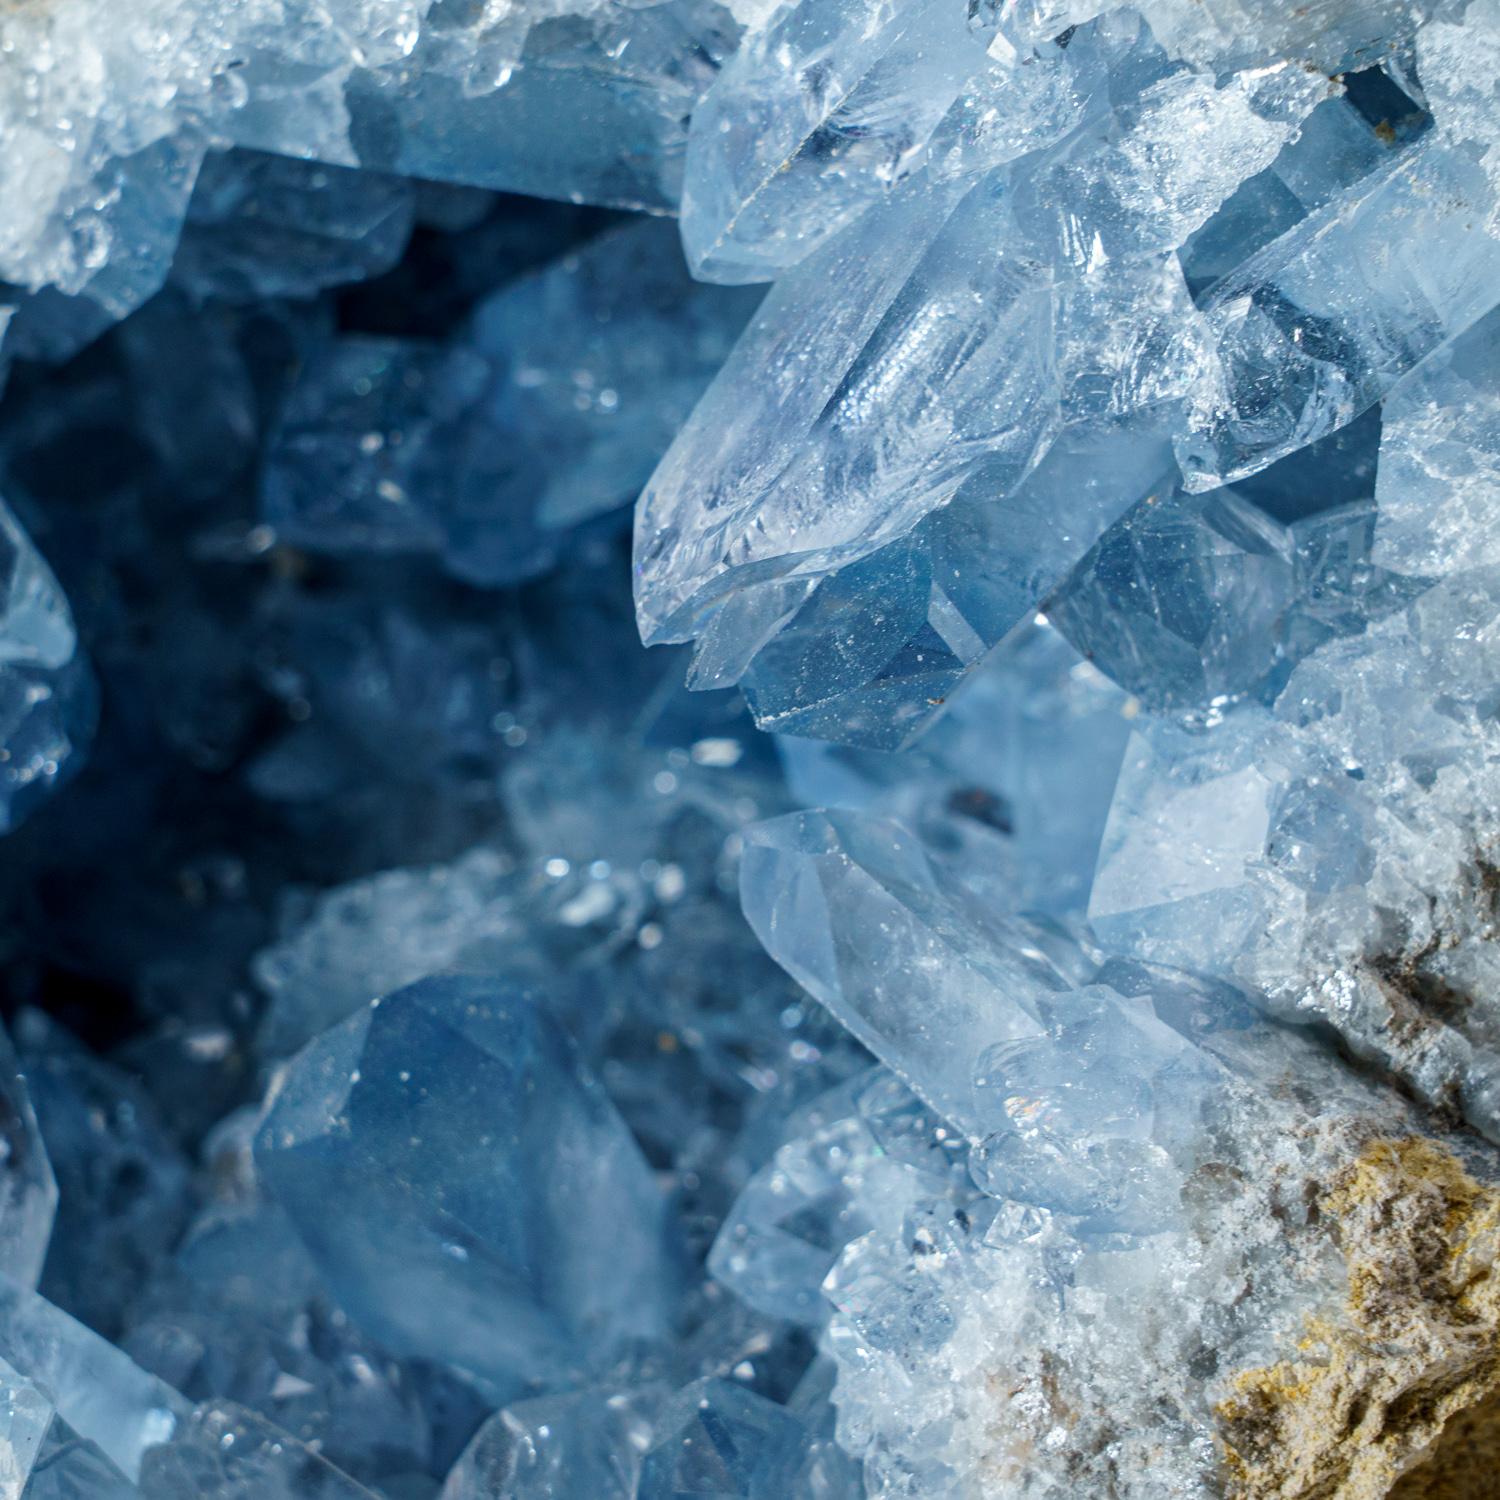 This unique Madagascan Blue Celestite Cluster exhibits large, gem crystals of remarkable quality, featuring prism faces and sharp chisel-terminations - surpassing the average blue-grey grains from the region. All shiny crystals are glassy and boast